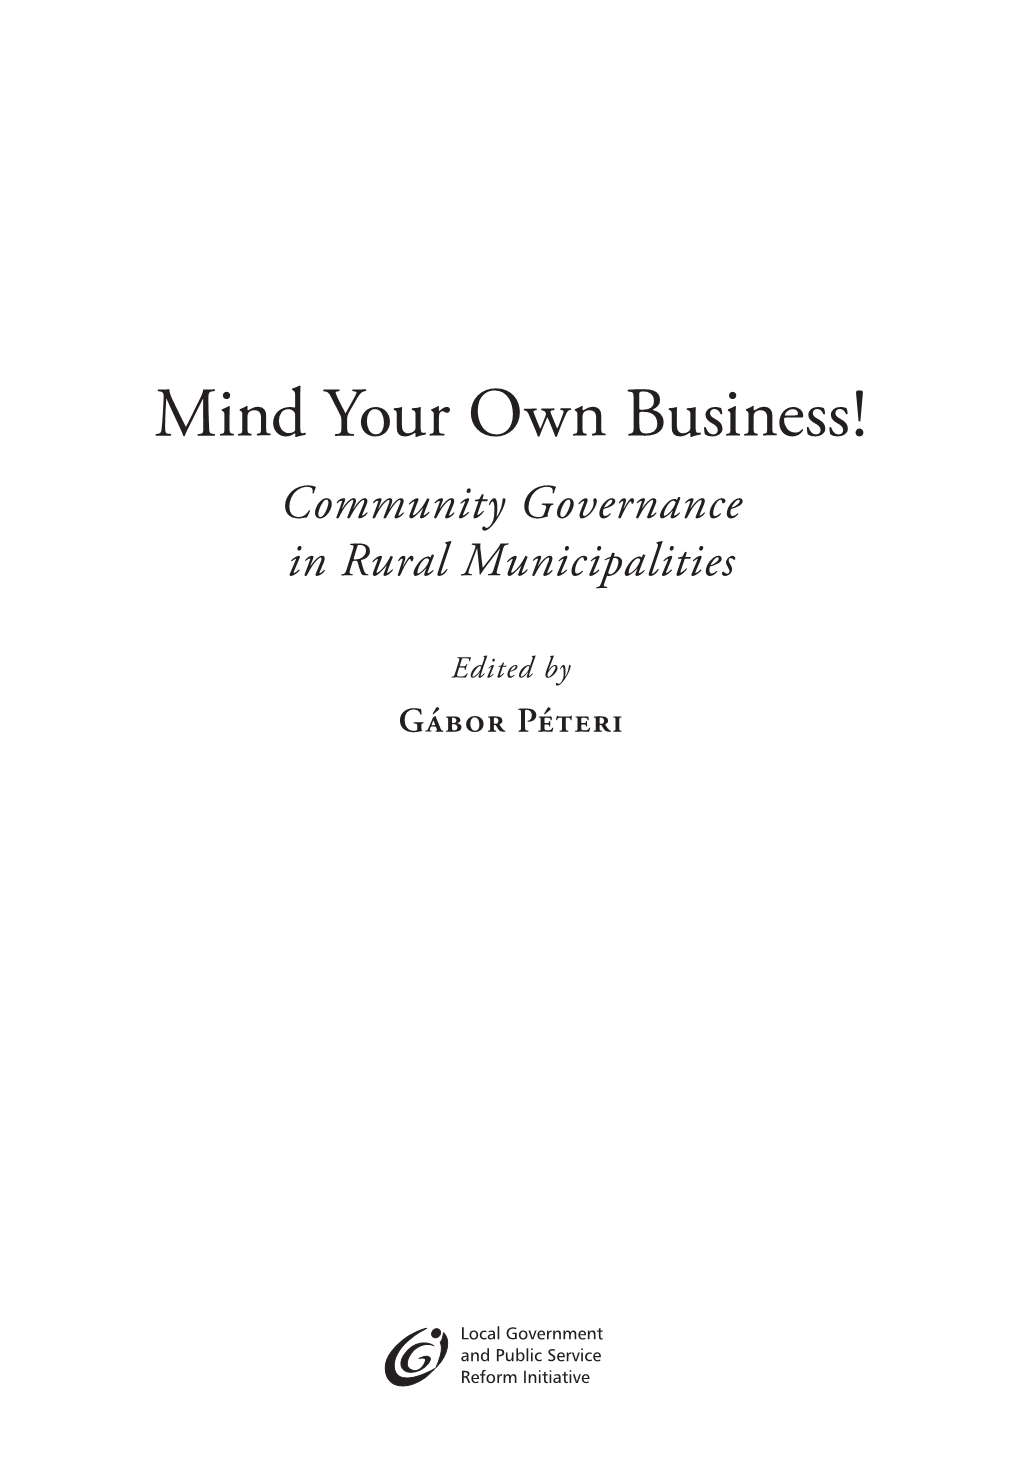 Mind Your Own Business! Community Governance in Rural Municipalities